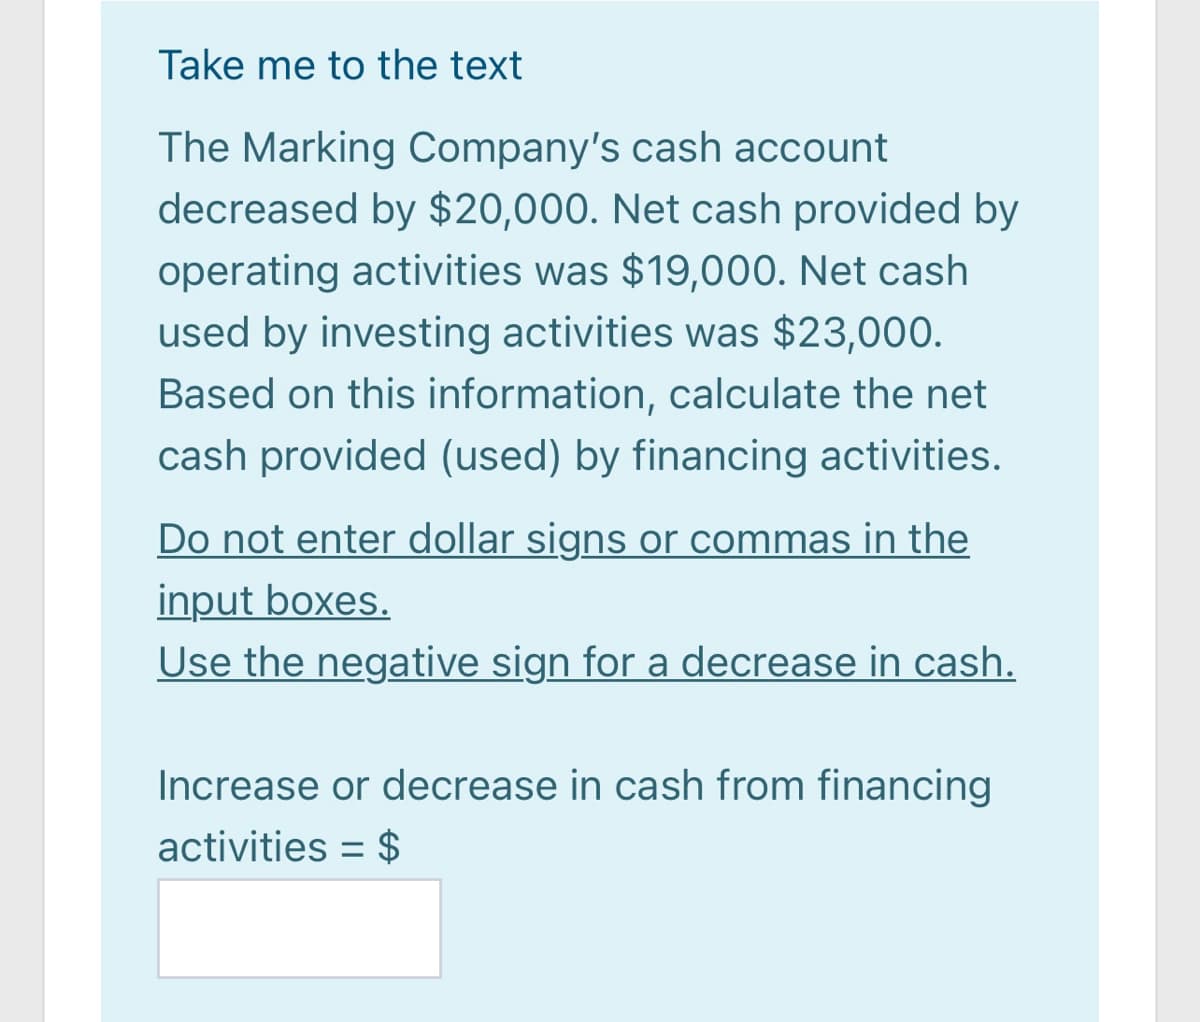 Take me to the text
The Marking Company's cash account
decreased by $20,000. Net cash provided by
operating activities was $19,000. Net cash
used by investing activities was $23,000.
Based on this information, calculate the net
cash provided (used) by financing activities.
Do not enter dollar signs or commas in the
input boxes.
Use the negative sign for a decrease in cash.
Increase or decrease in cash from financing
activities = $
